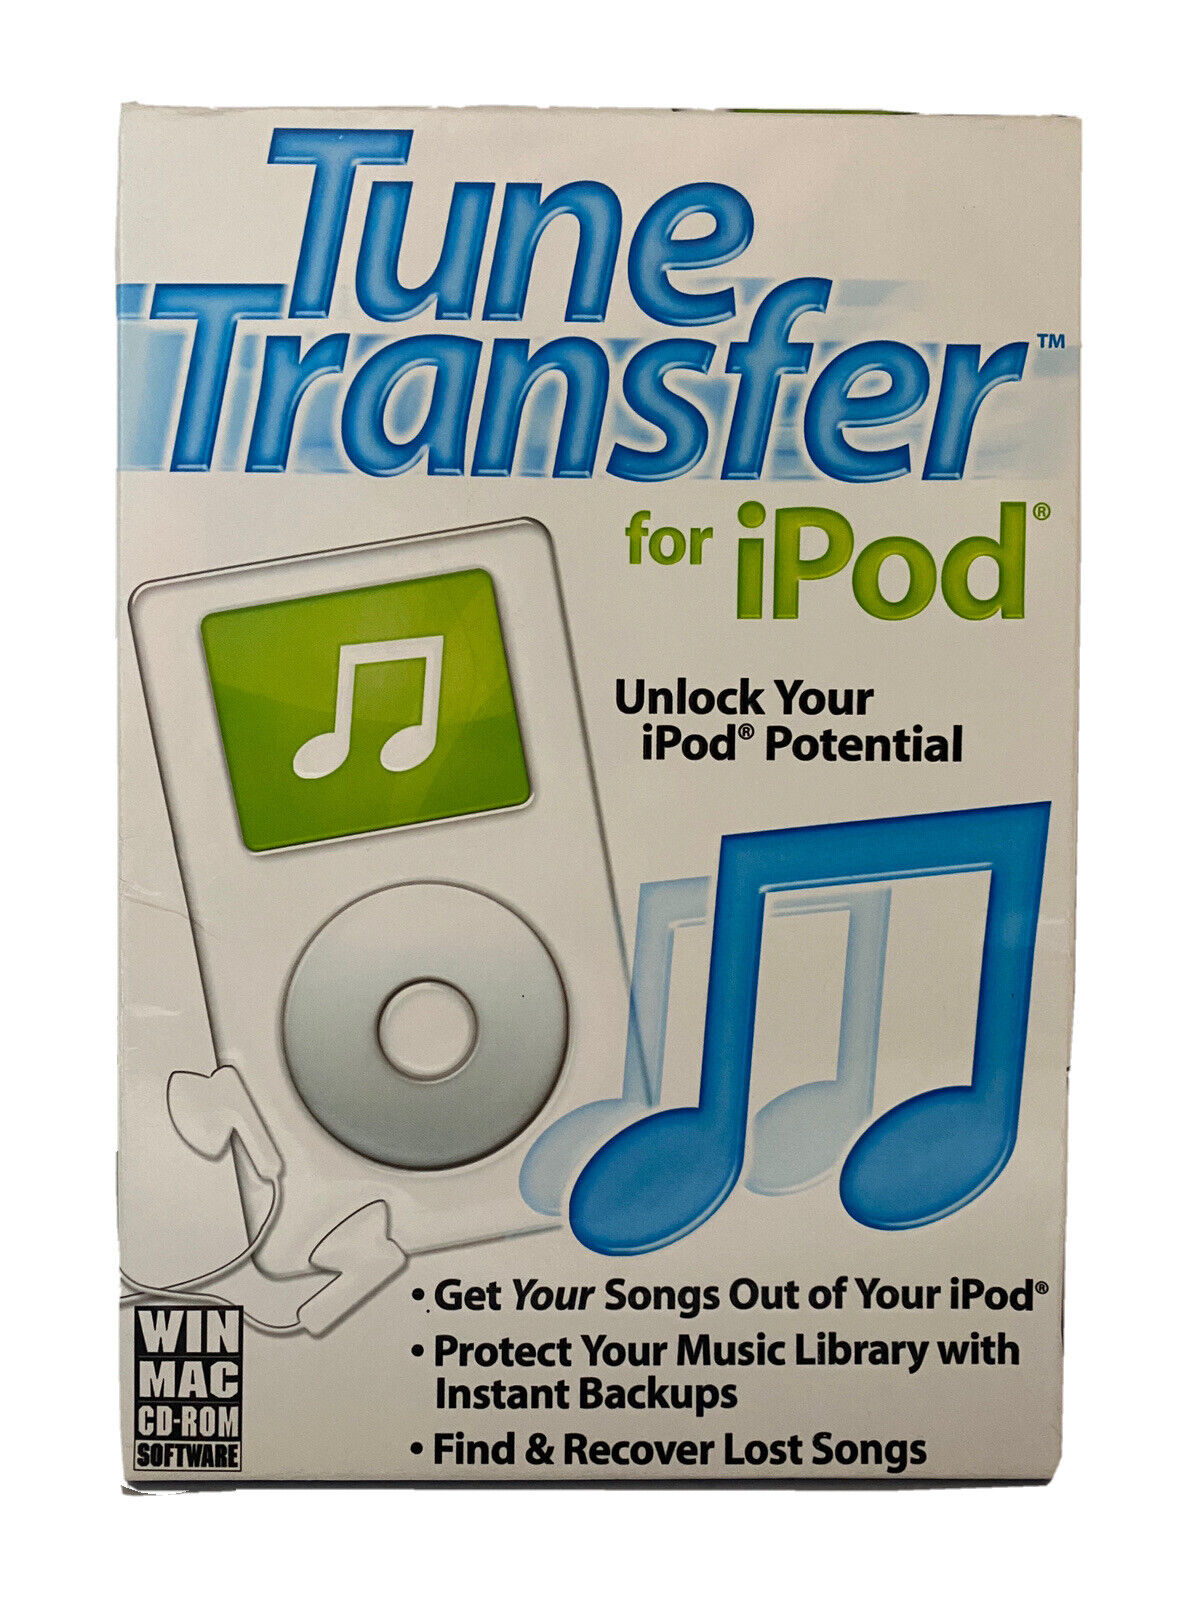 New Sesled Tune Transfer For iPod CD-ROM Mac OS X/Windows 2000/XP